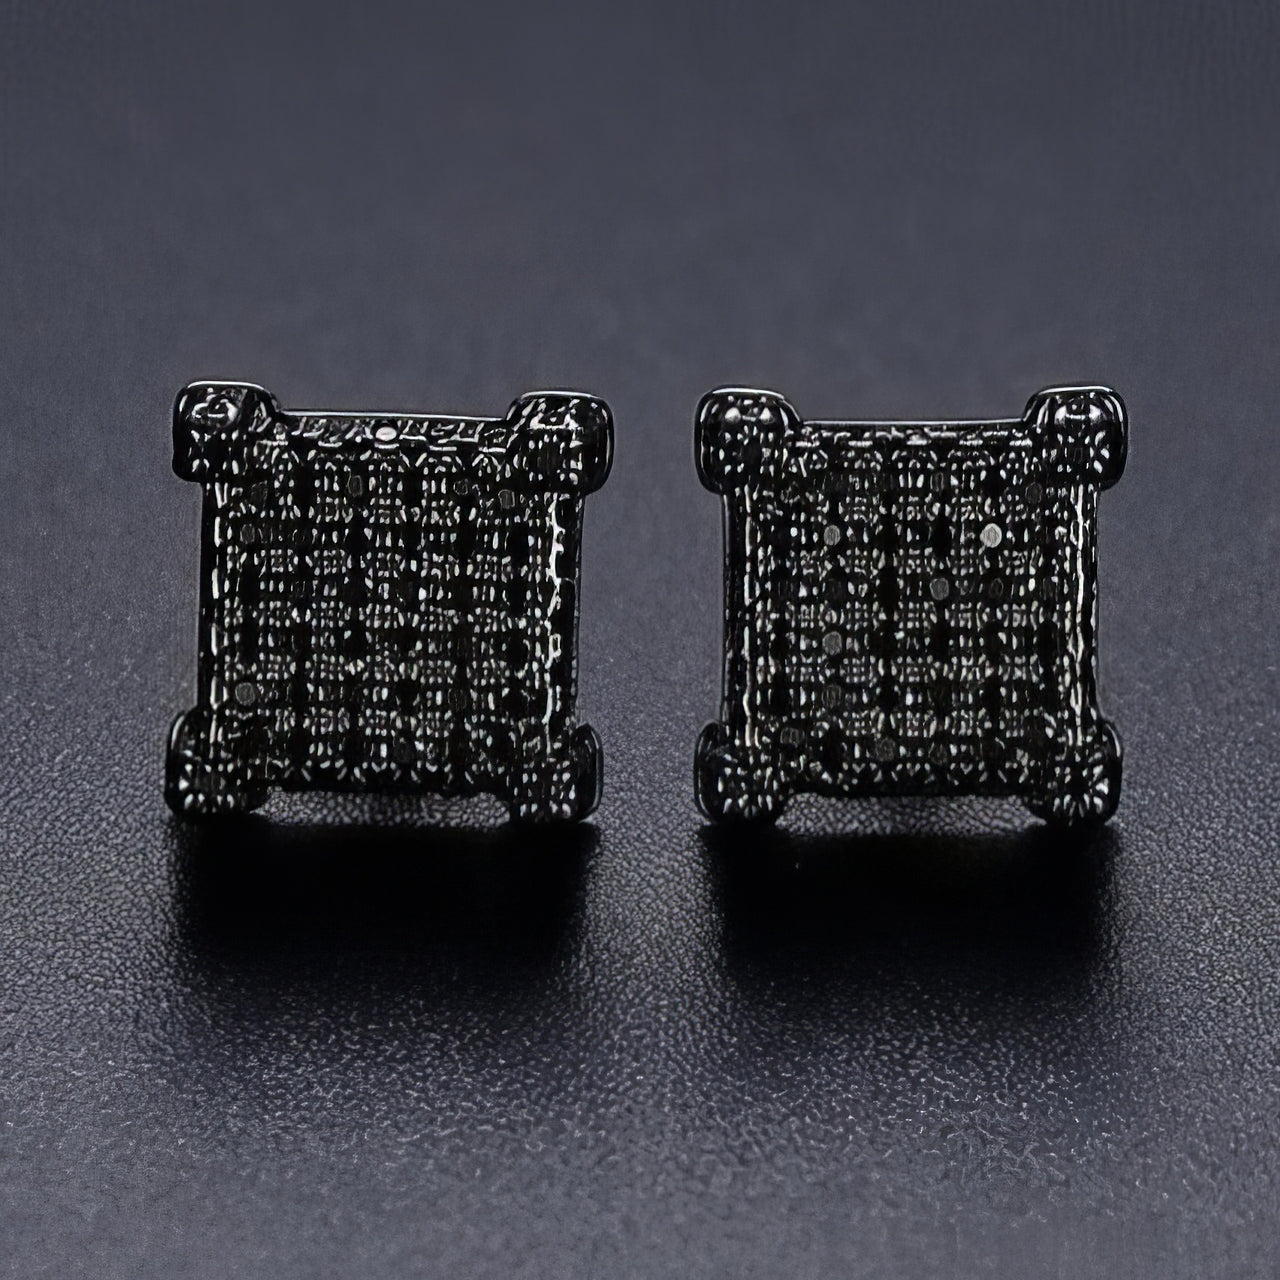 10mm Square Pave Stud Earrings - Different Drips